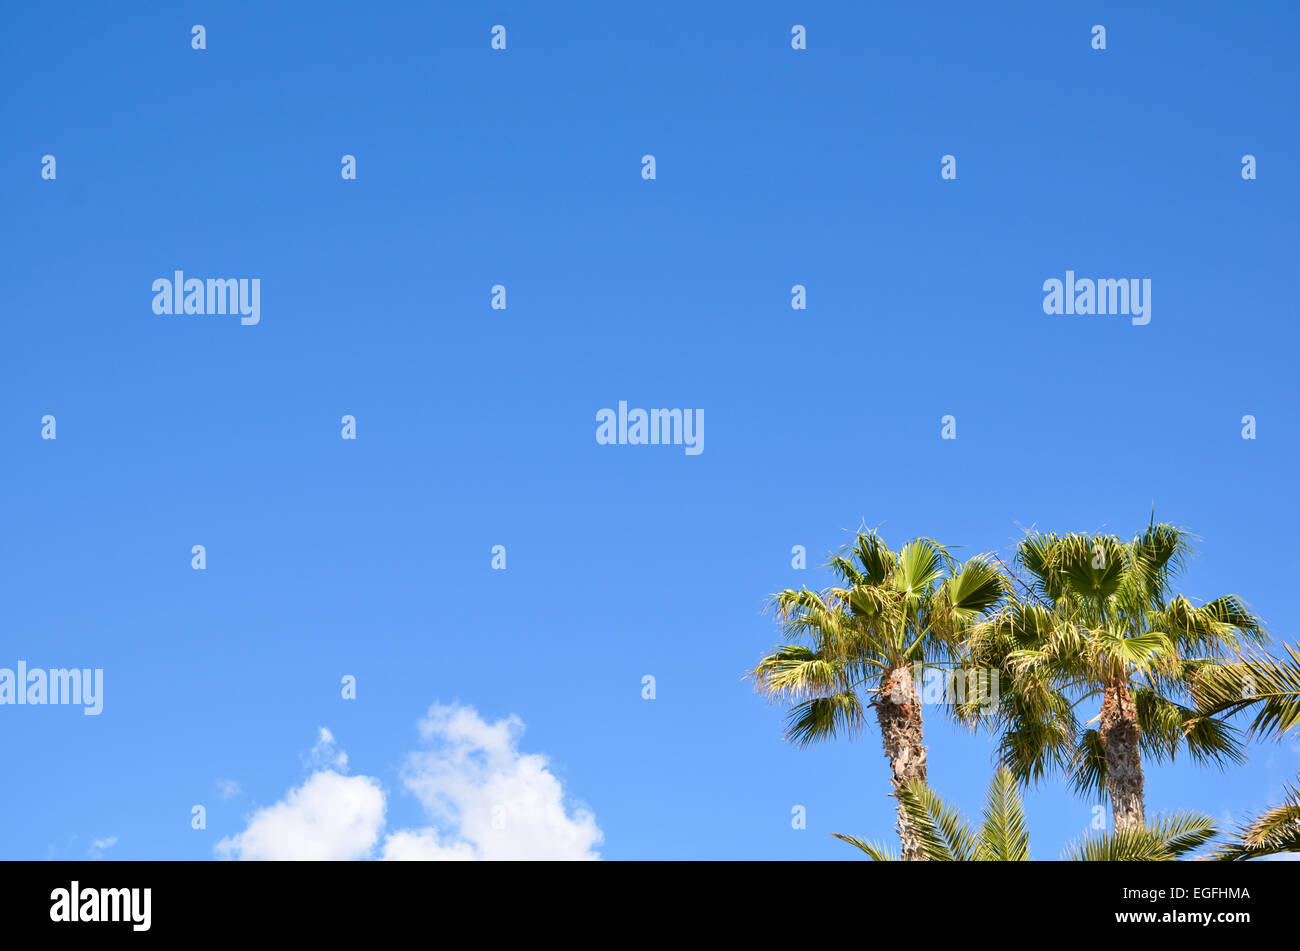 Palm trees at blue sky with a white cloud and copyspace Stock Photo